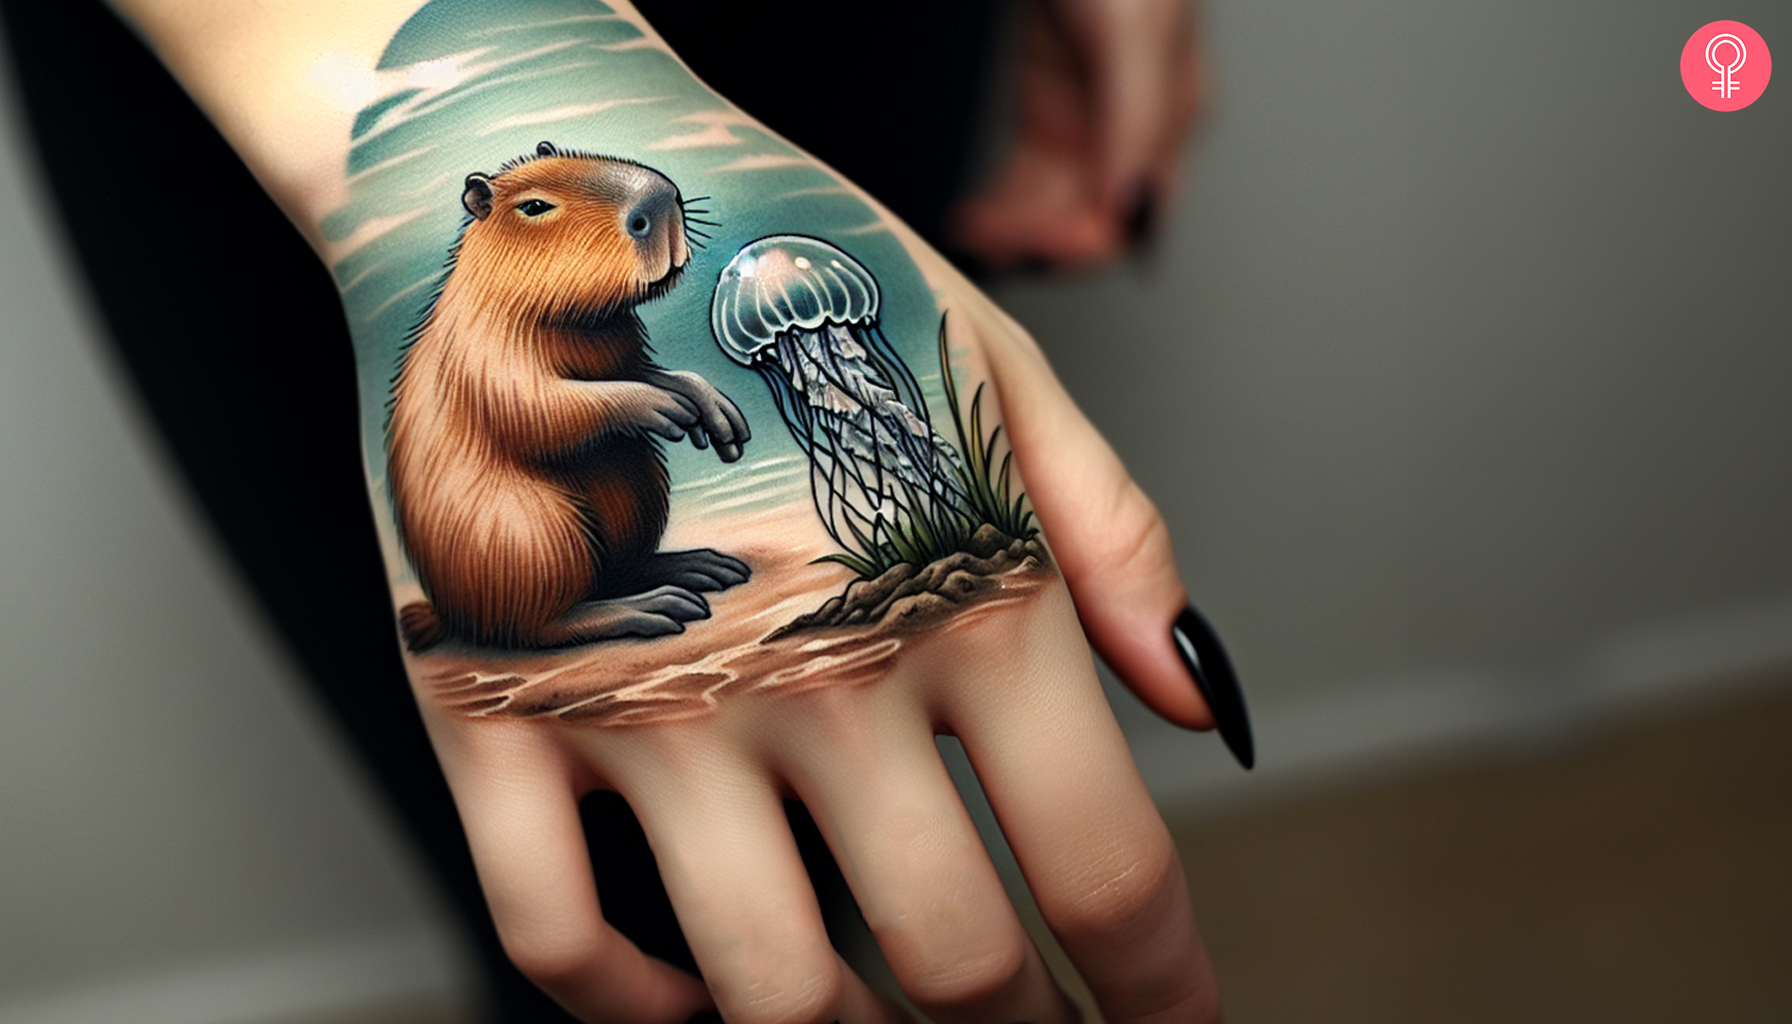 A tattoo on a woman’s hand featuring a capybara and a jellyfish